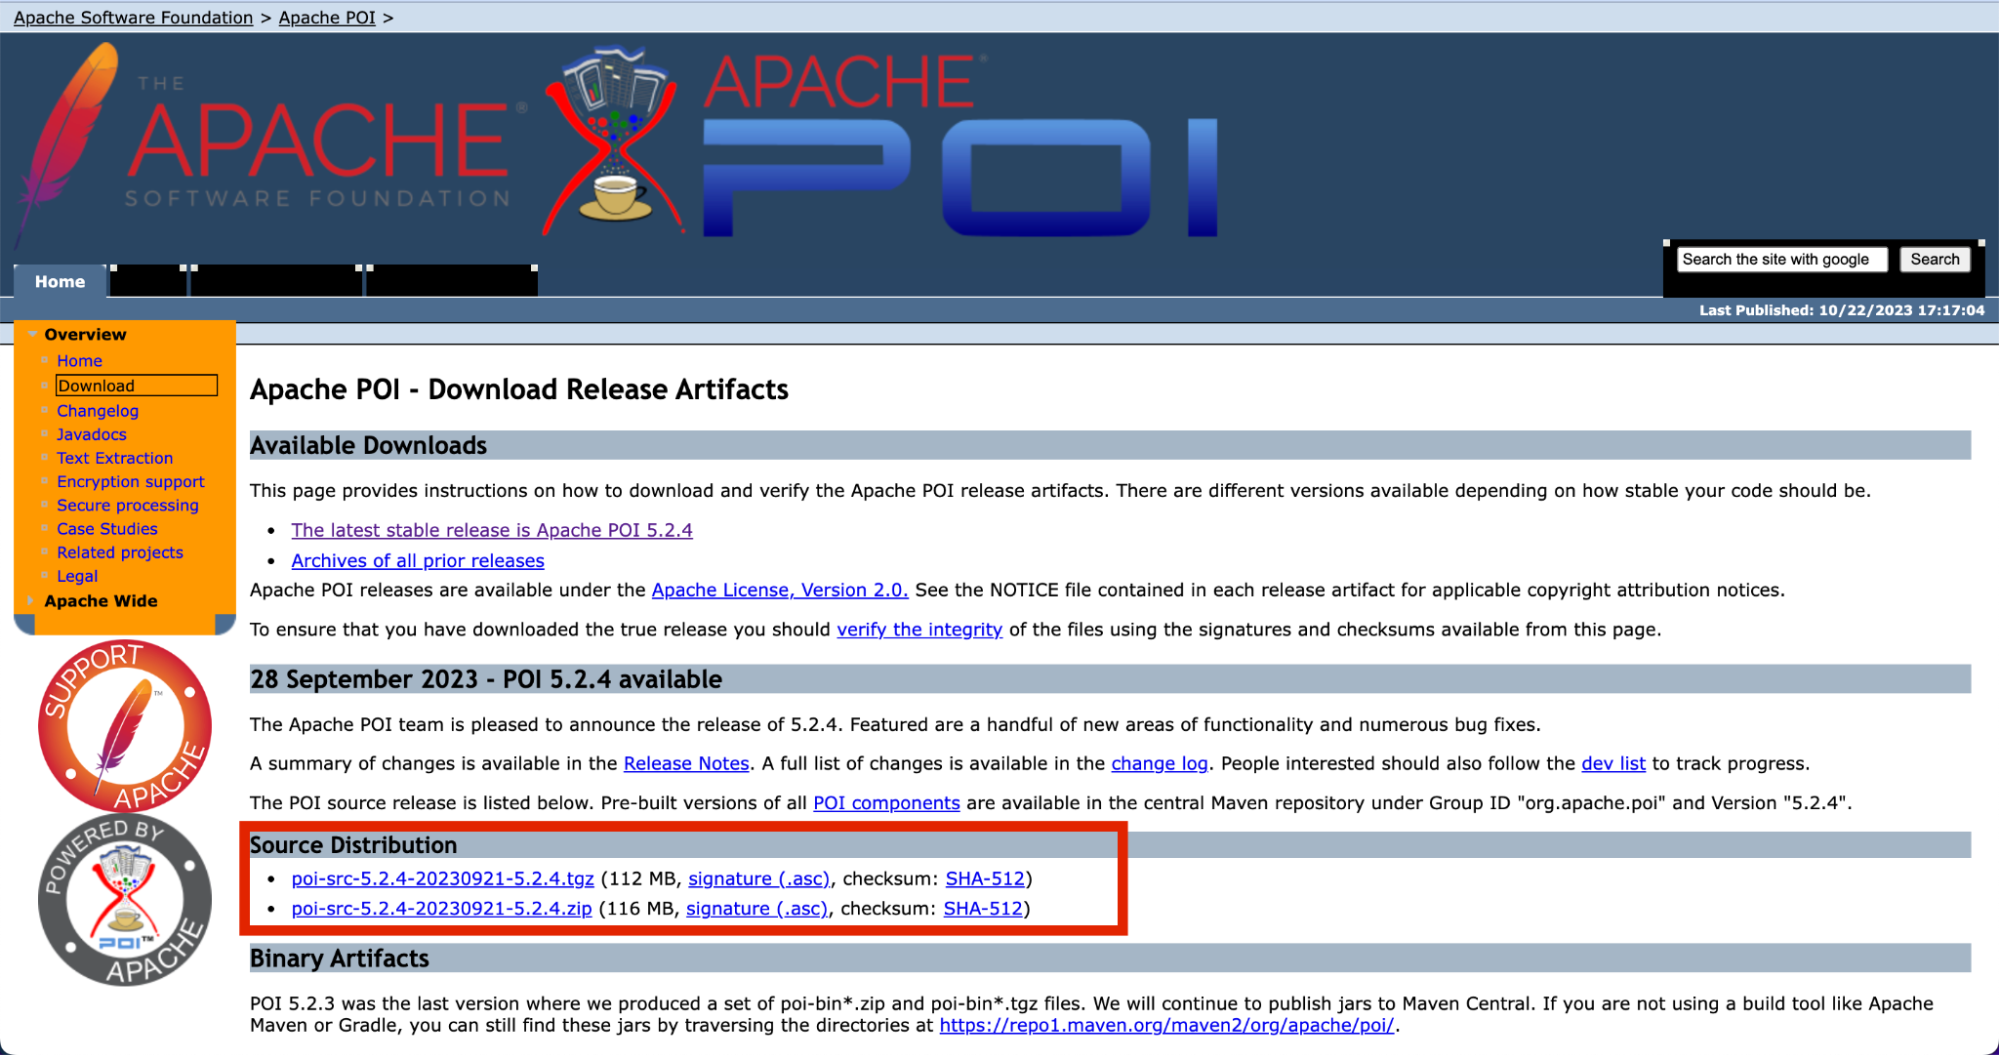 download the JAR files for Apache POI